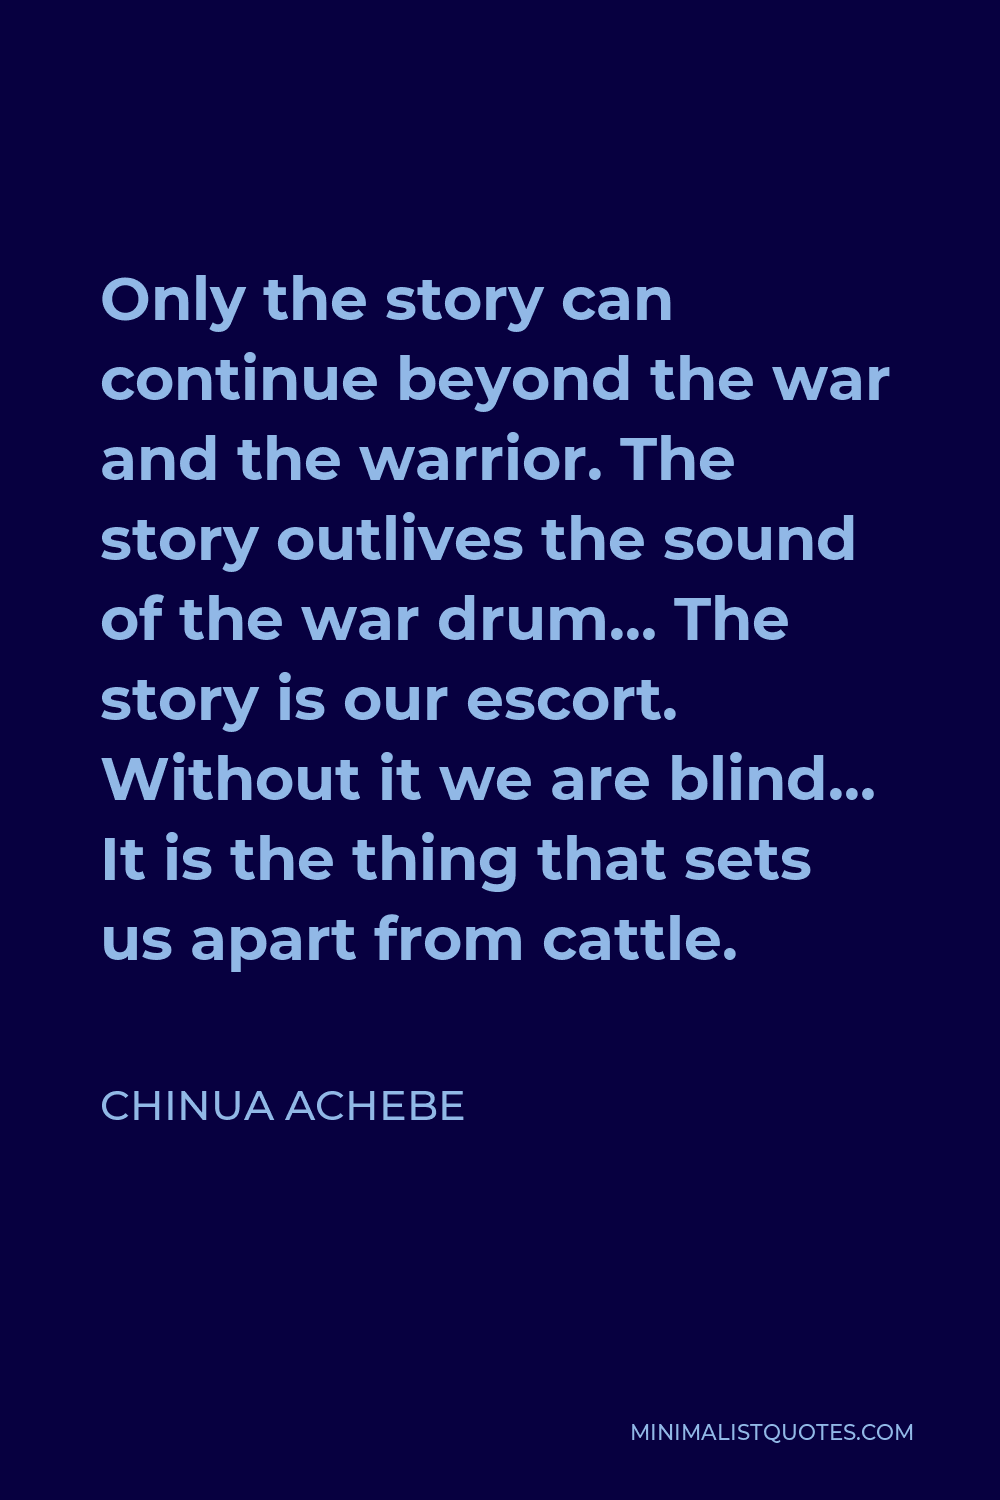 Chinua Achebe Quote - Only the story can continue beyond the war and the warrior. The story outlives the sound of the war drum… The story is our escort. Without it we are blind… It is the thing that sets us apart from cattle.